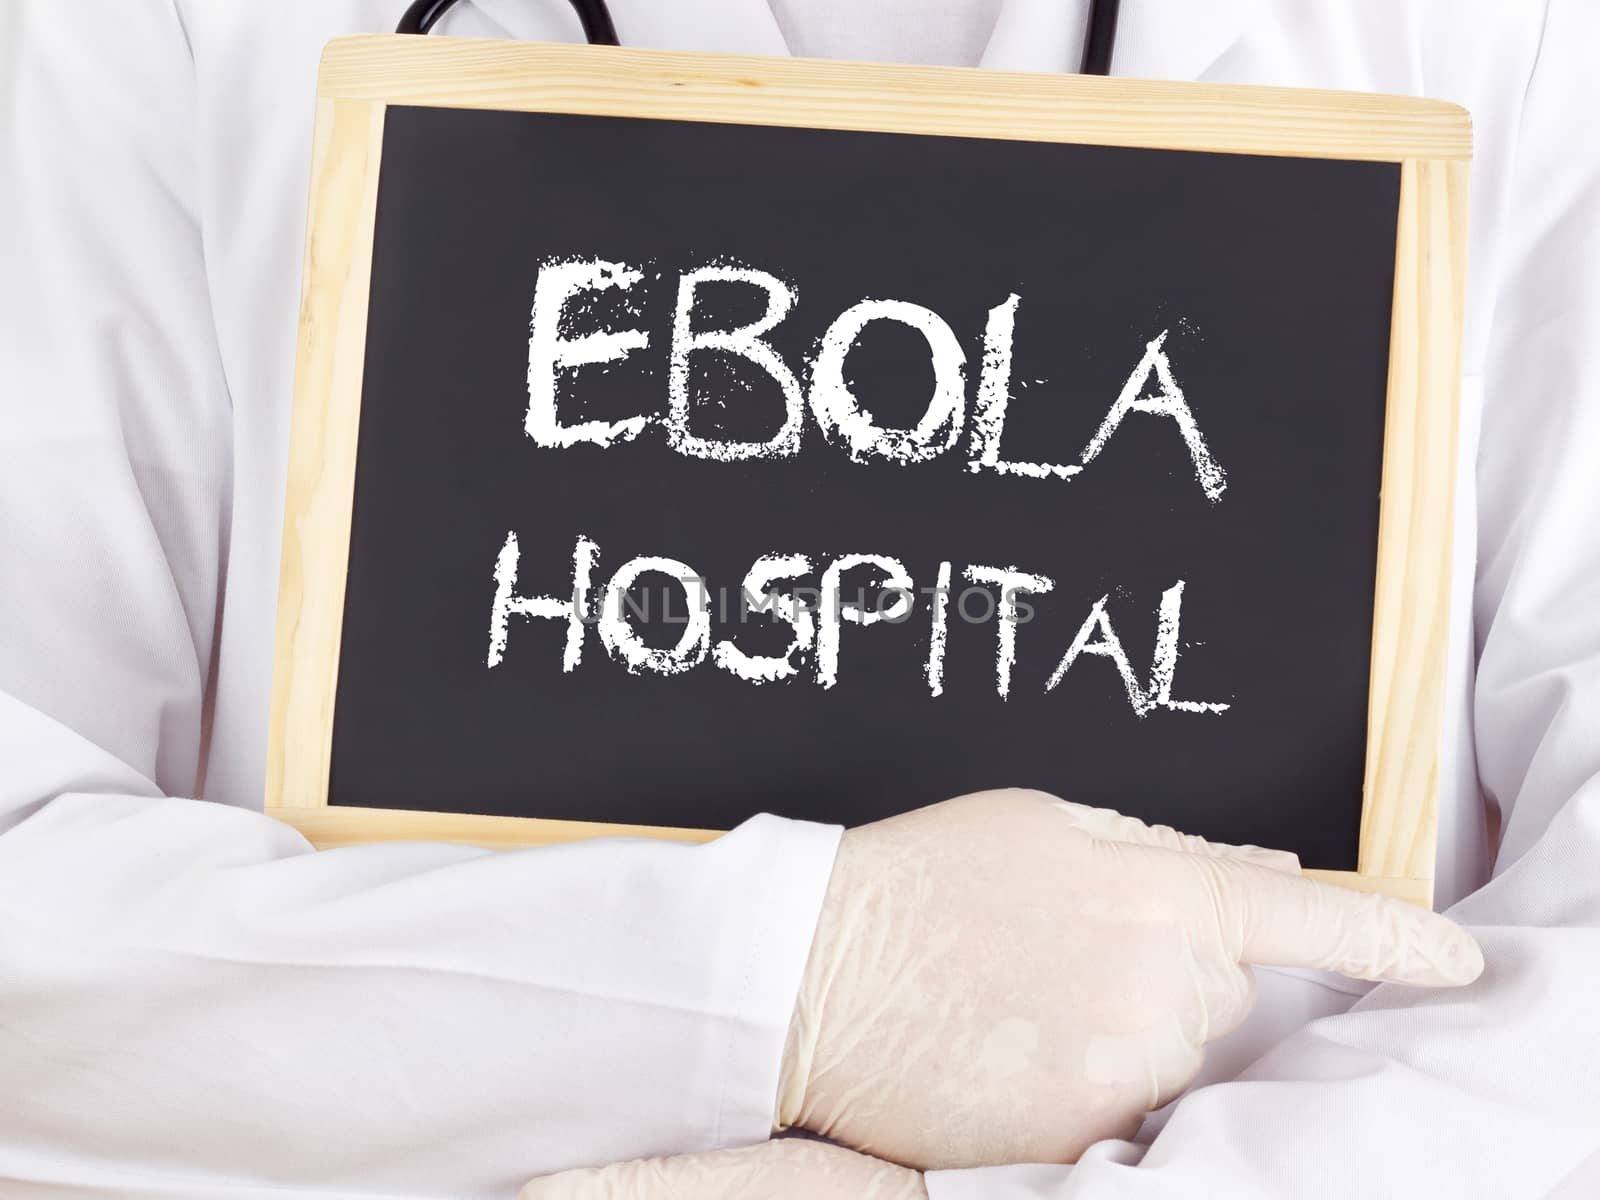 Doctor shows information: Ebola hospital by gwolters